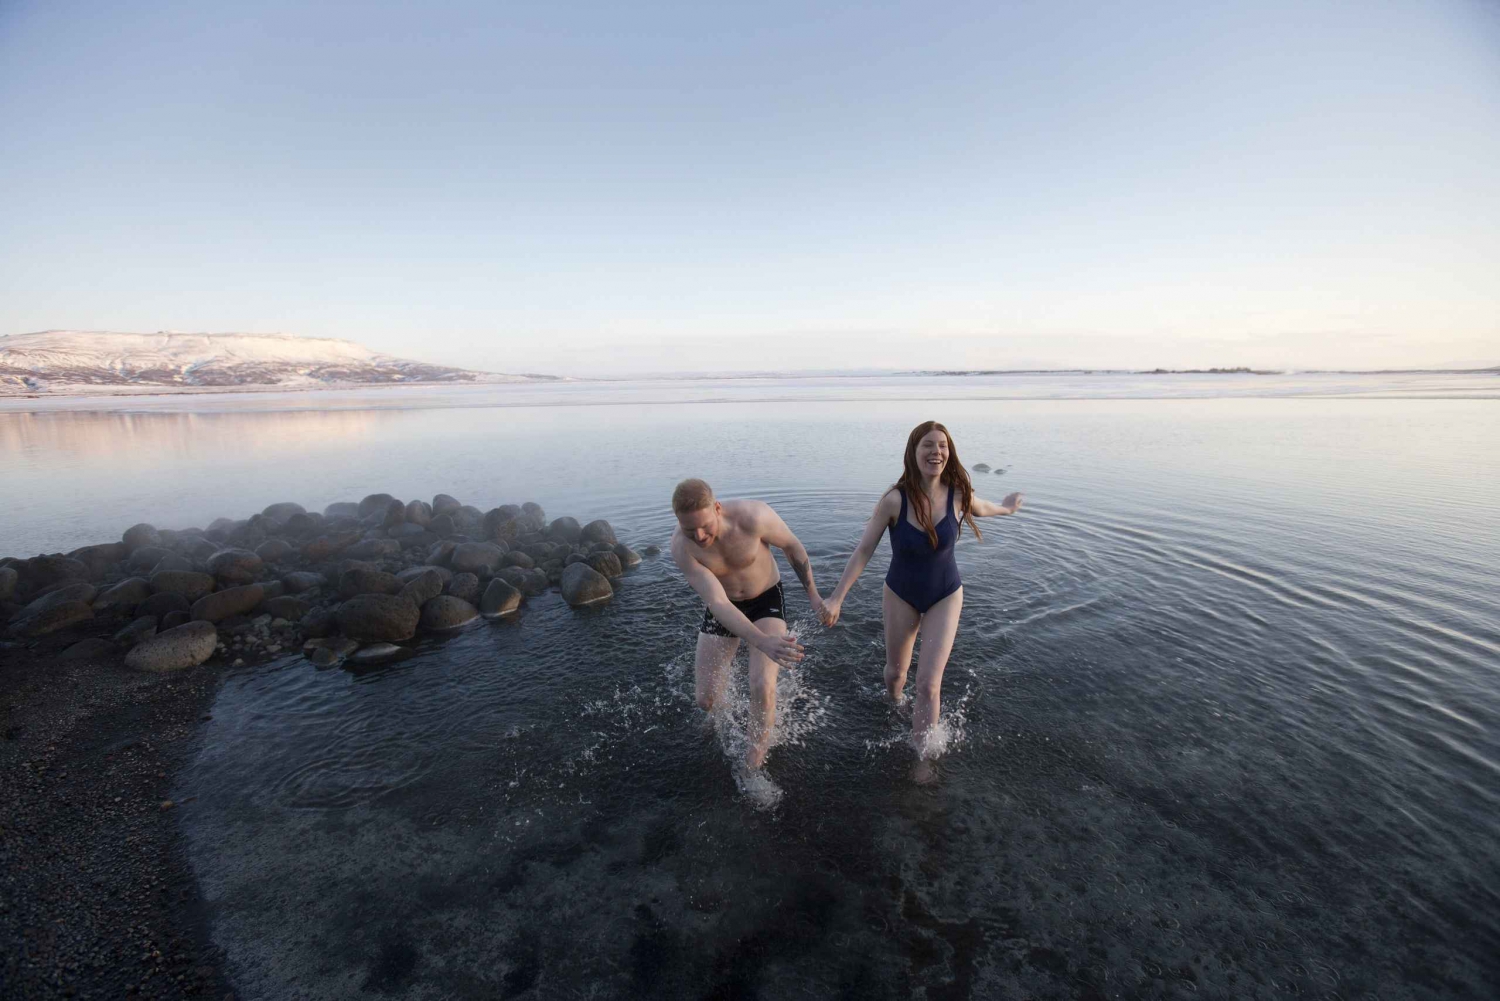 Reykjavik: Warm Baths and Cool Lights with Dinner Buffet